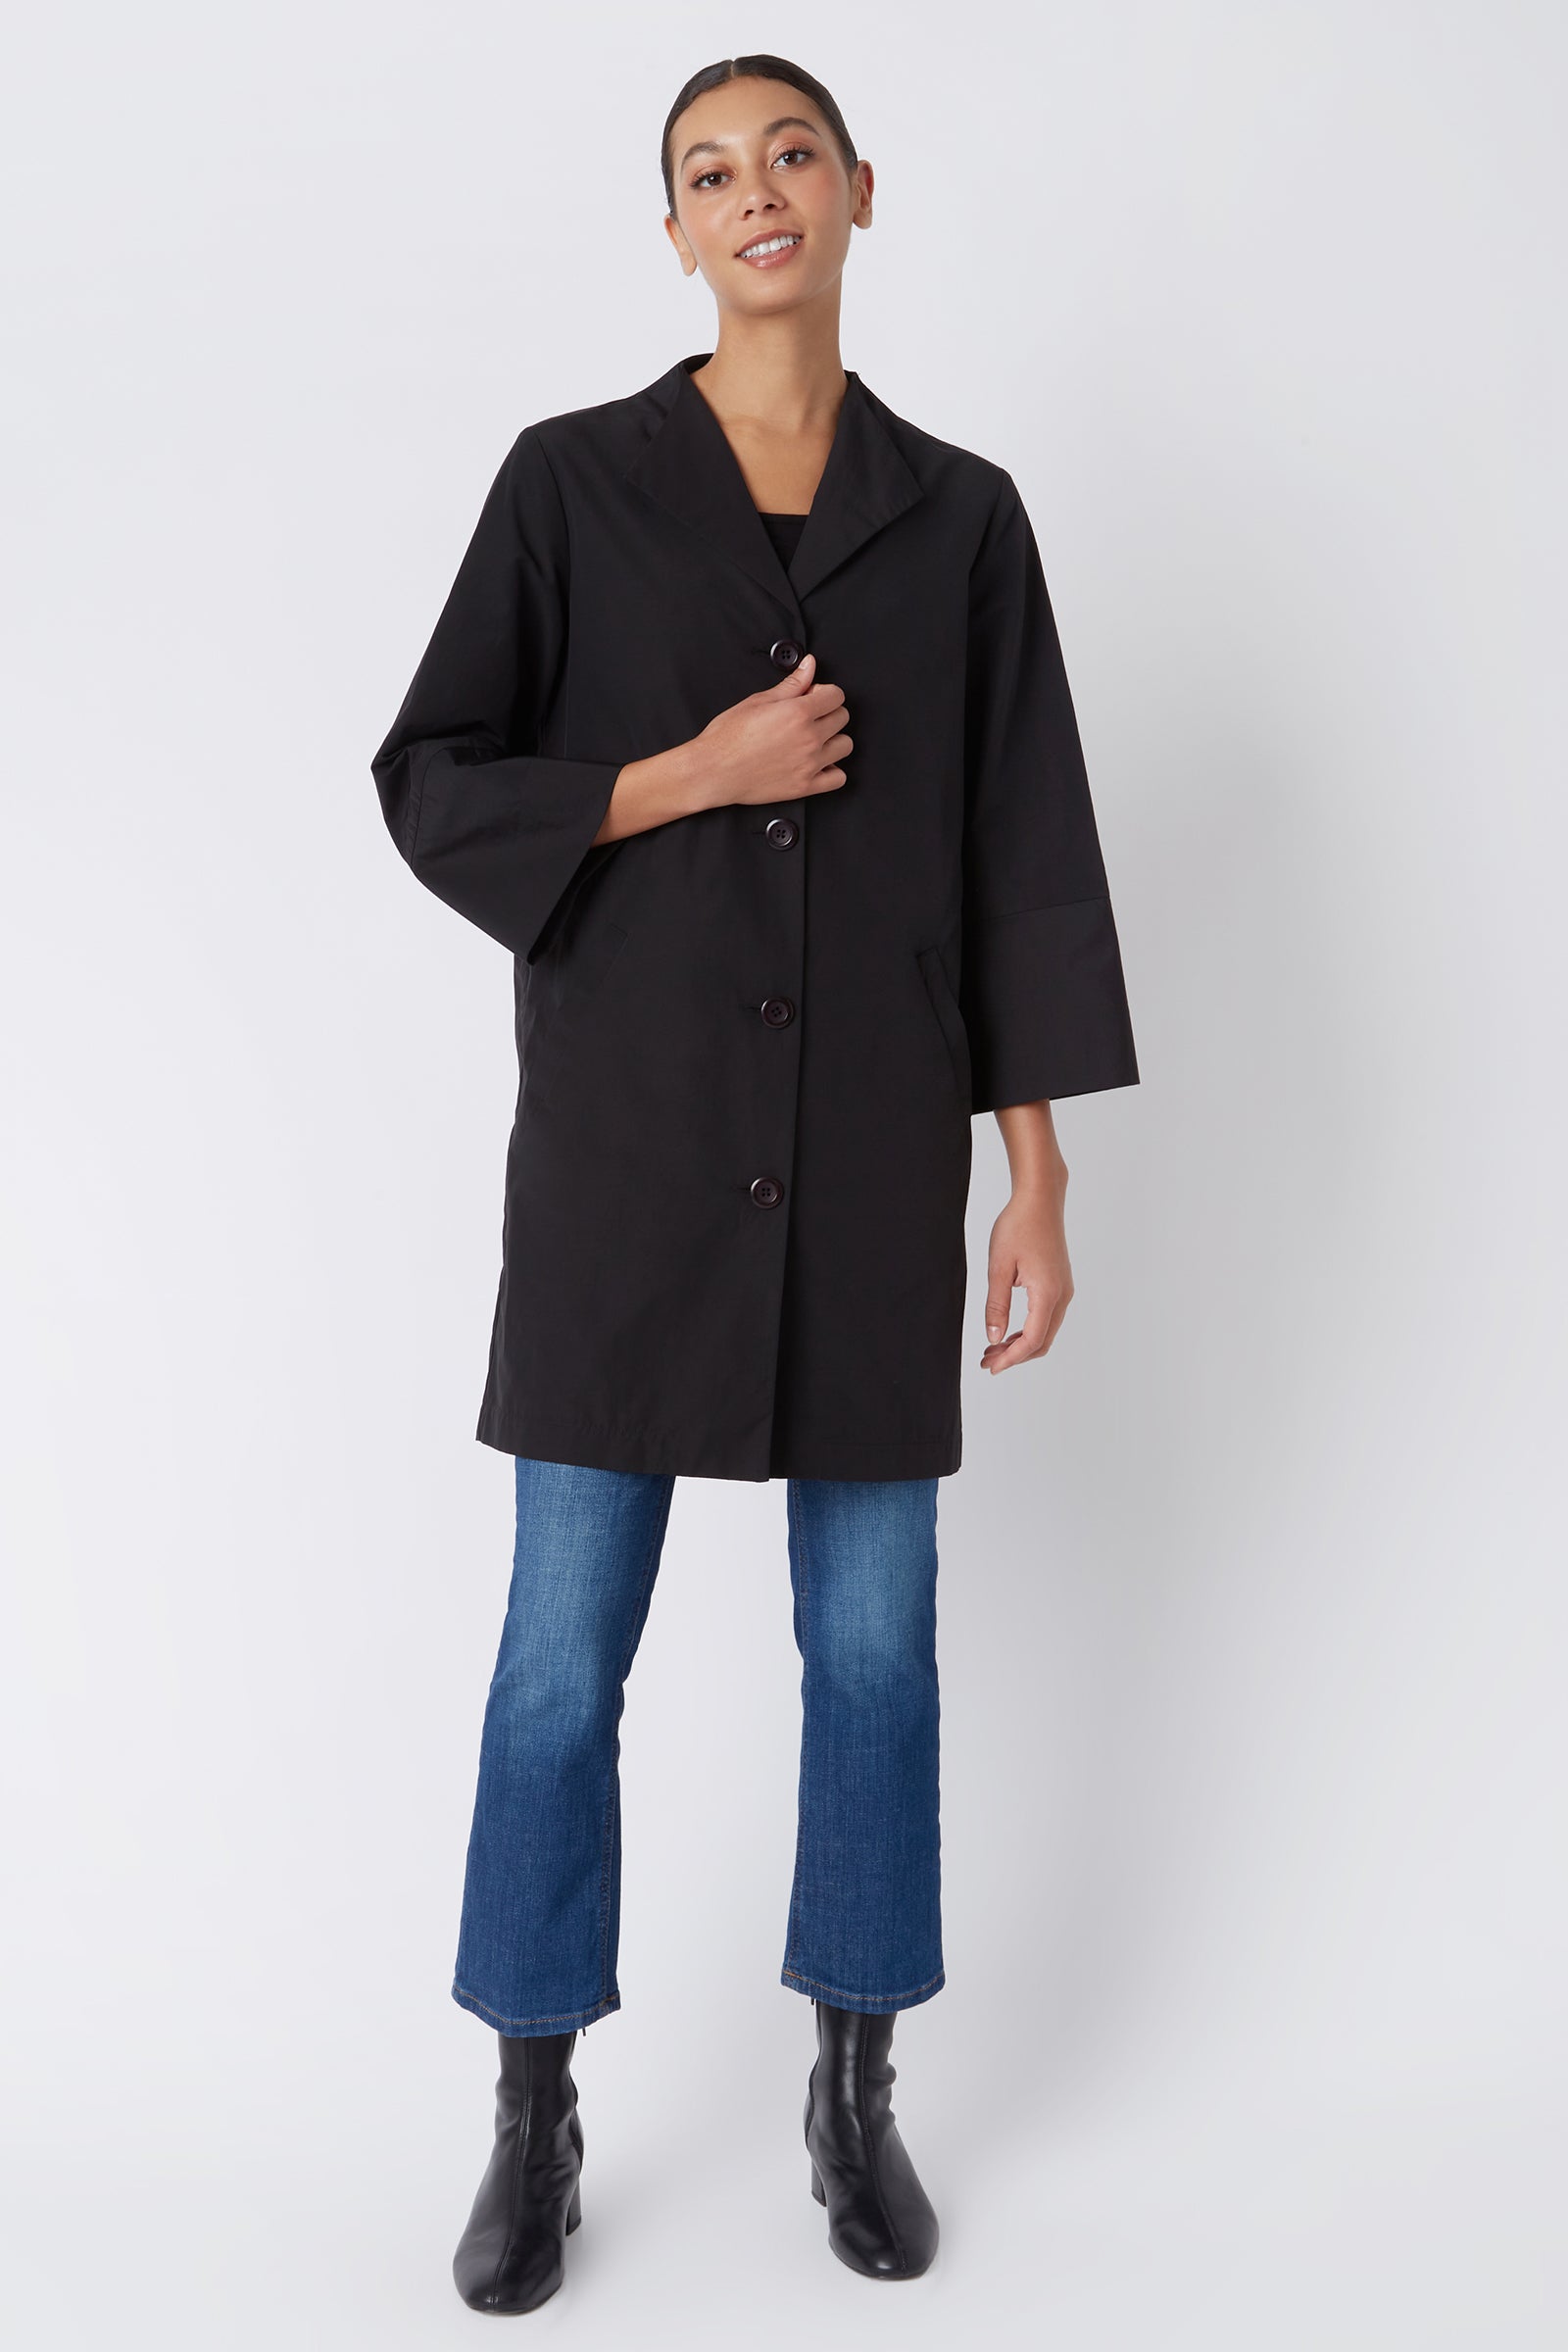 Kal Rieman Else Peacoat in Black Italian Broadcloth on Model with Hand on Coat Full Front View